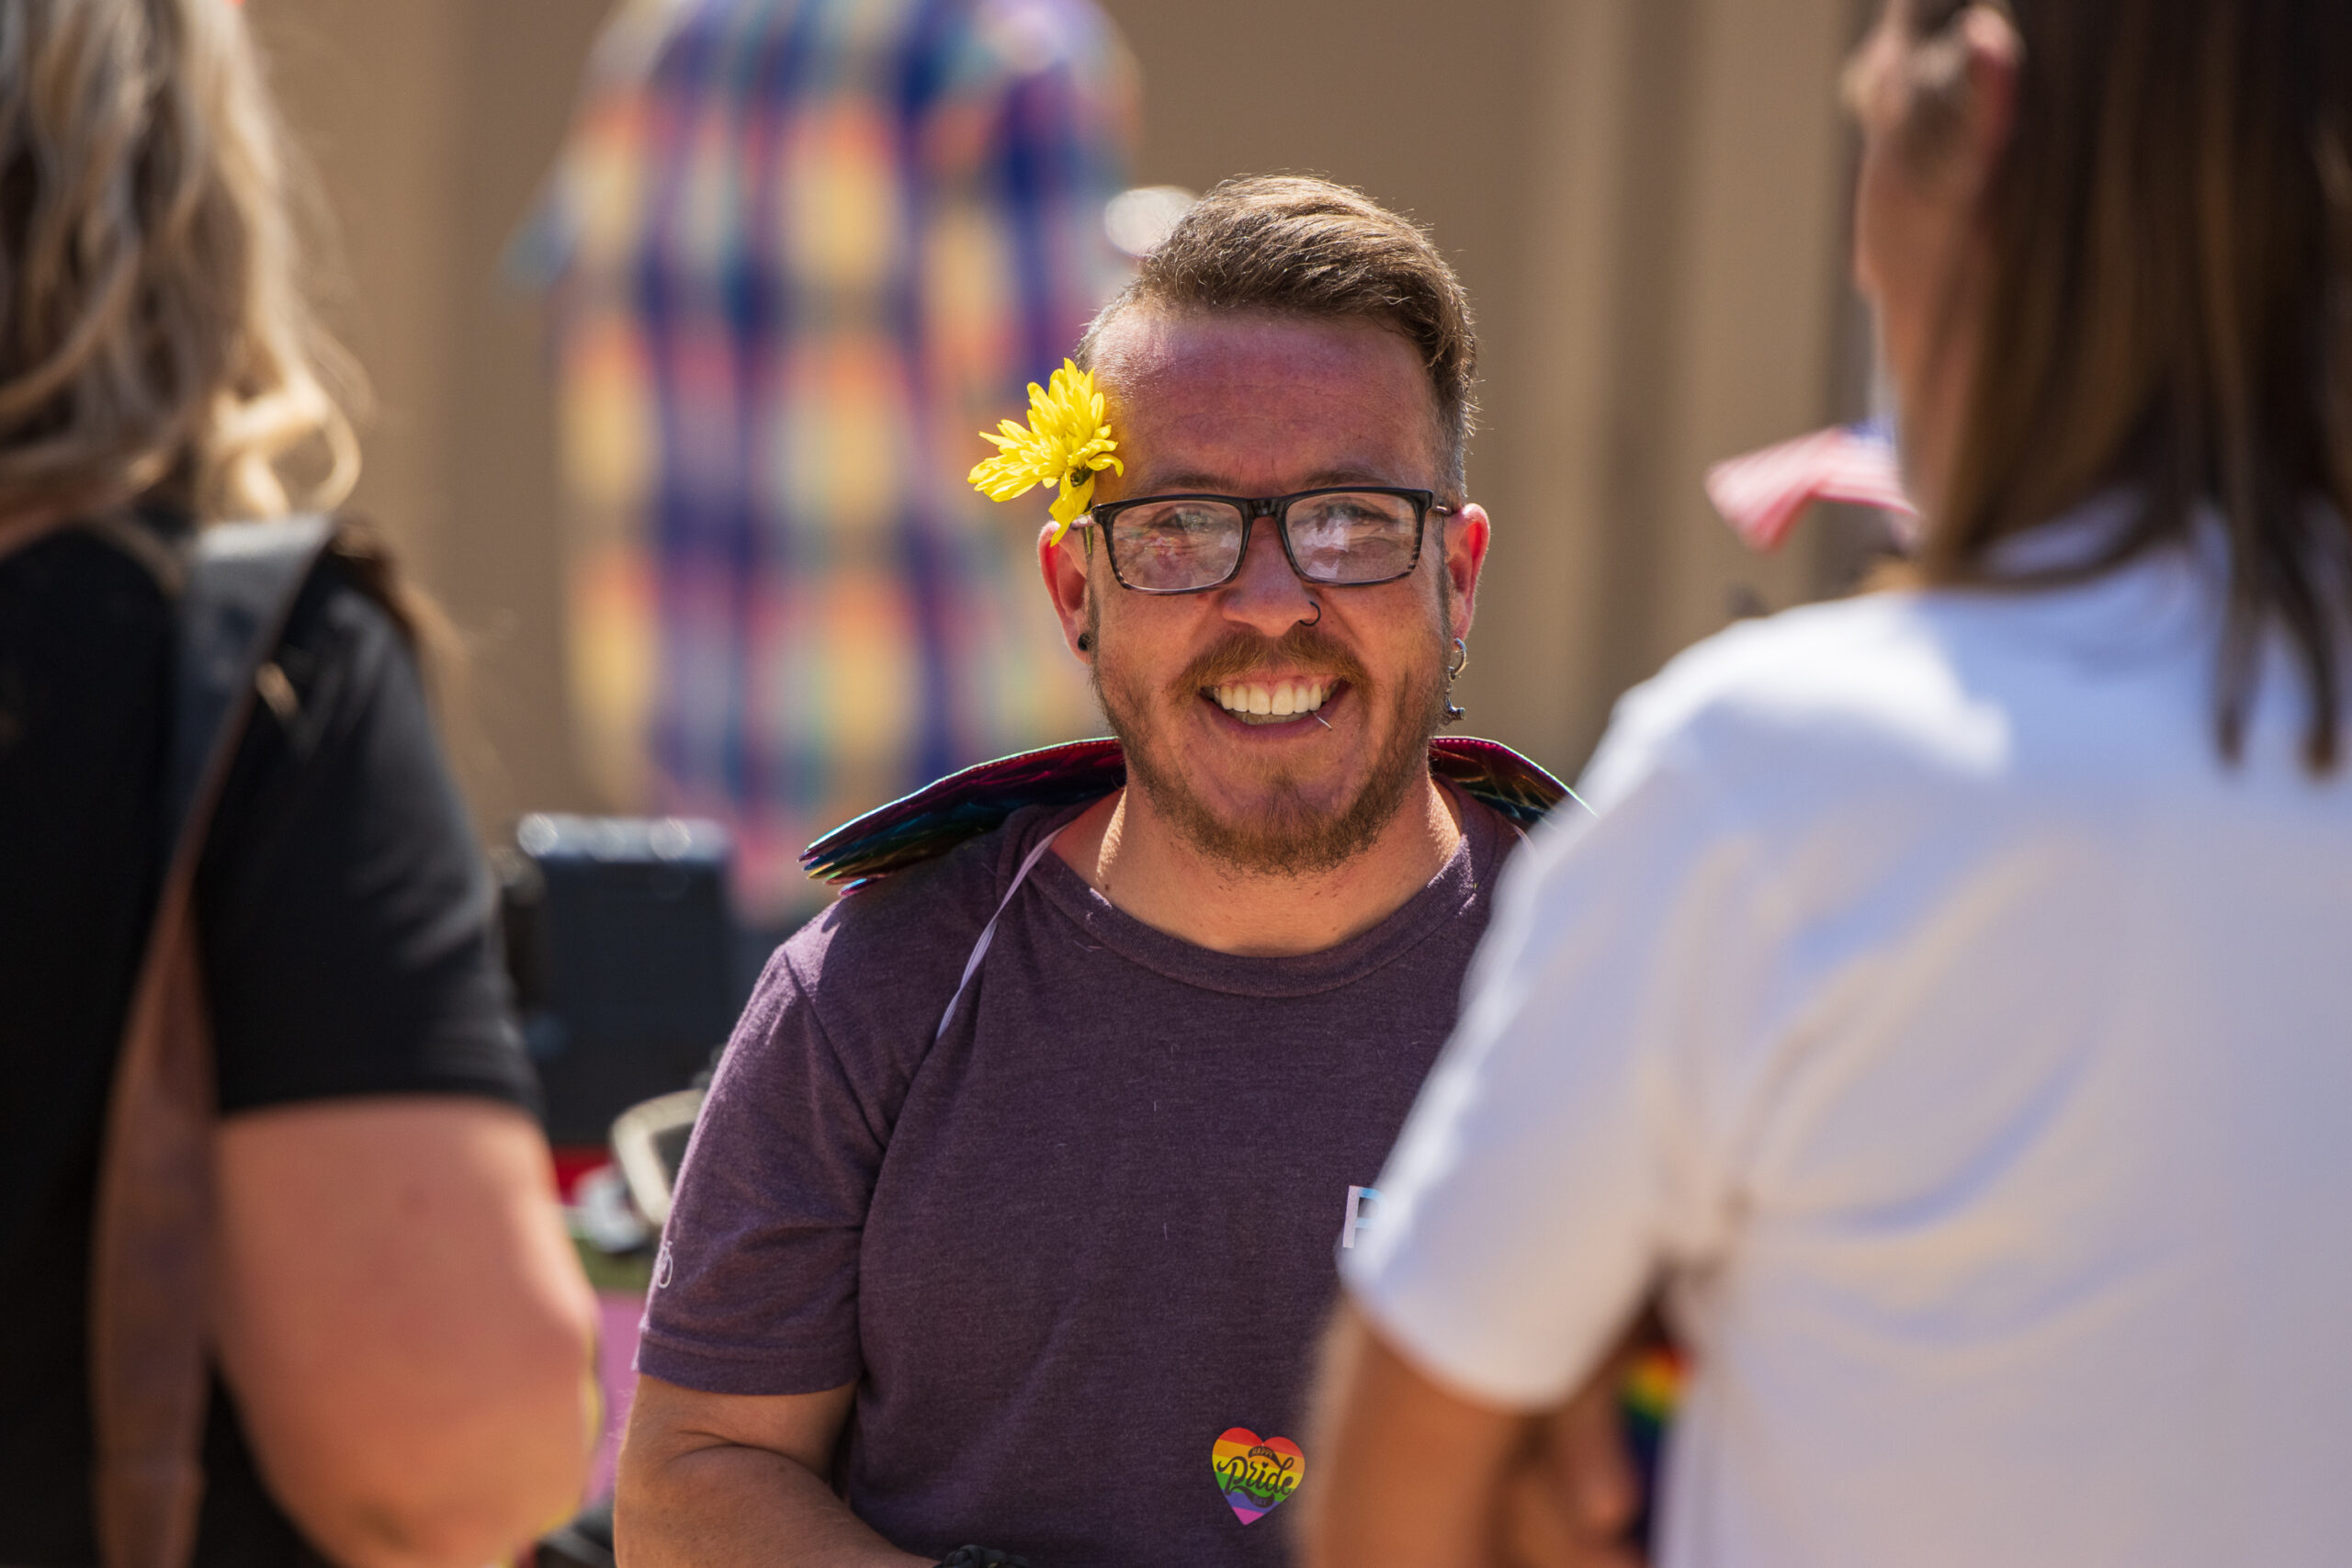 Trans-male wearing dark purple T-shirt, iridescent rainbow unicorn wings, and dark rimmed glasses with a yellow daisy perched behind the right ear smiles generously at the camera while talking to two friends.